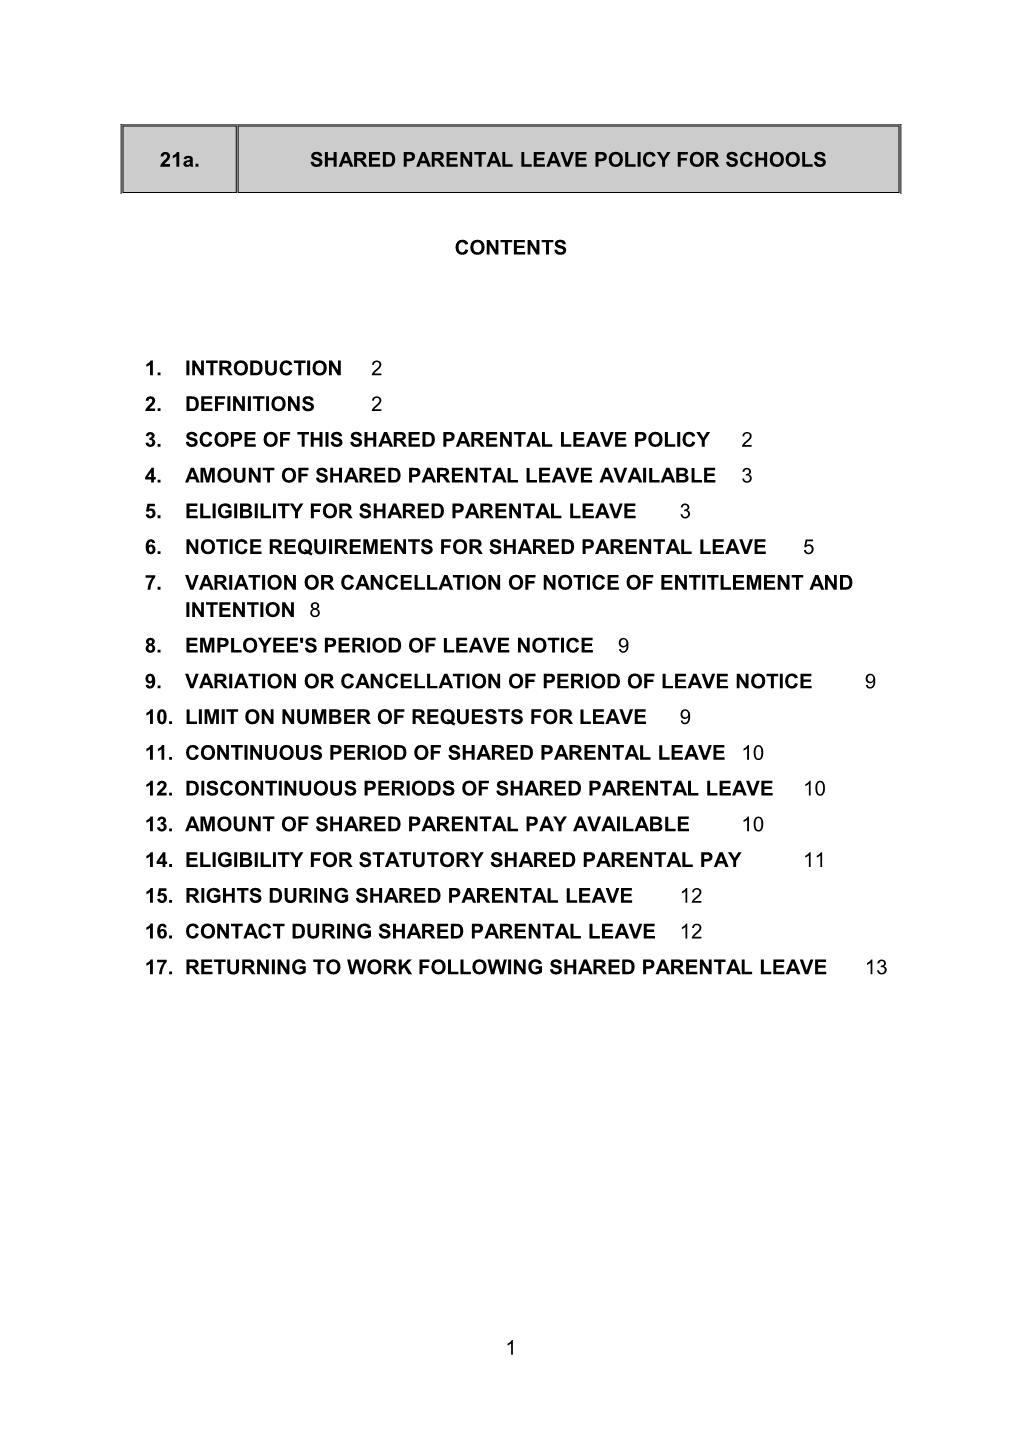 Chap 21A - Shared Parental Leave (Draft)